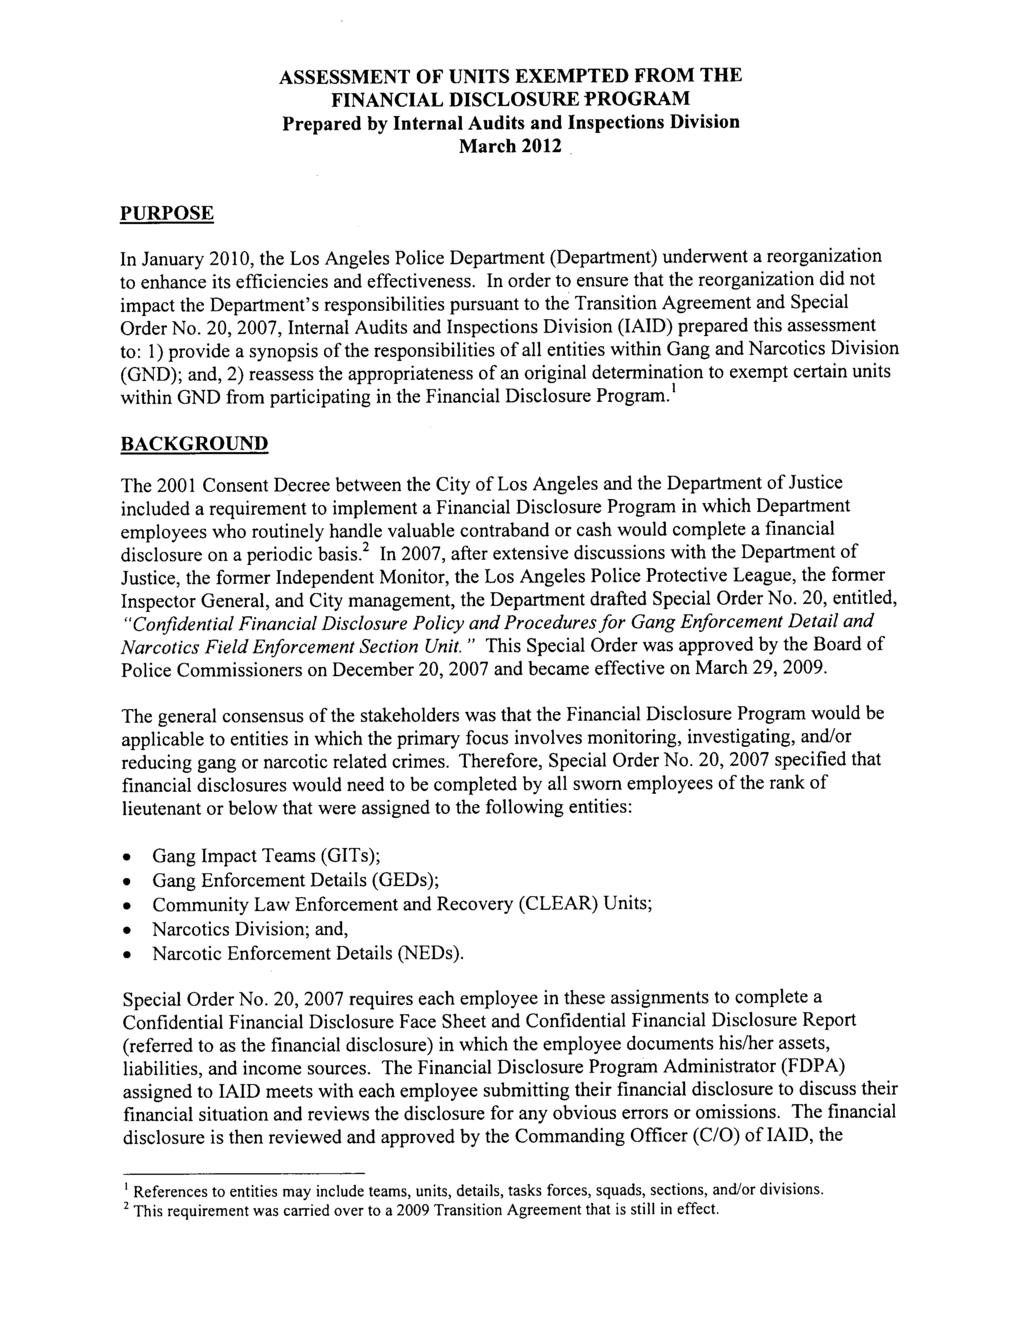 ASSESSMENT OF UNITS EXEMPTED FROM THE FINANCIAL DISCLOSURE PROGRAM Prepared by Internal Audits and Inspections Division March 2012 PURPOSE In January 2010, the Los Angeles Police Department